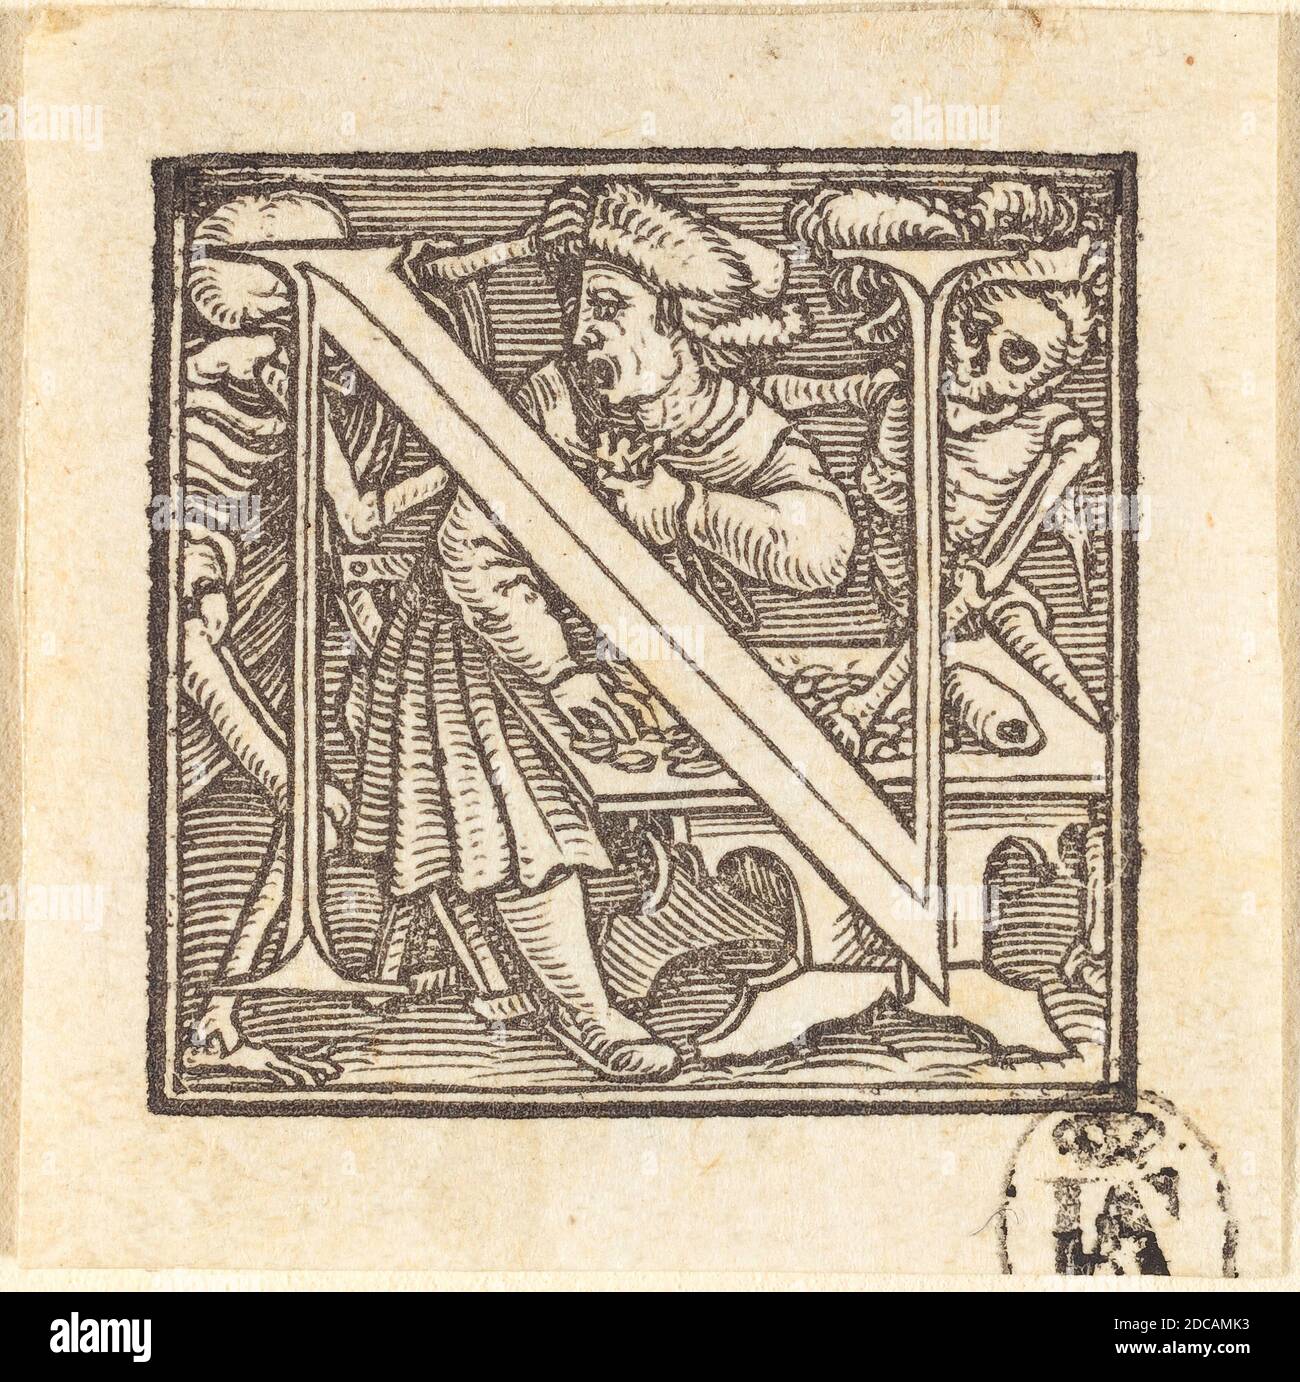 Hans Holbein the Younger, (artist), German, 1497/1498 - 1543, Letter N, Alphabet of Death, (series), woodcut Stock Photo